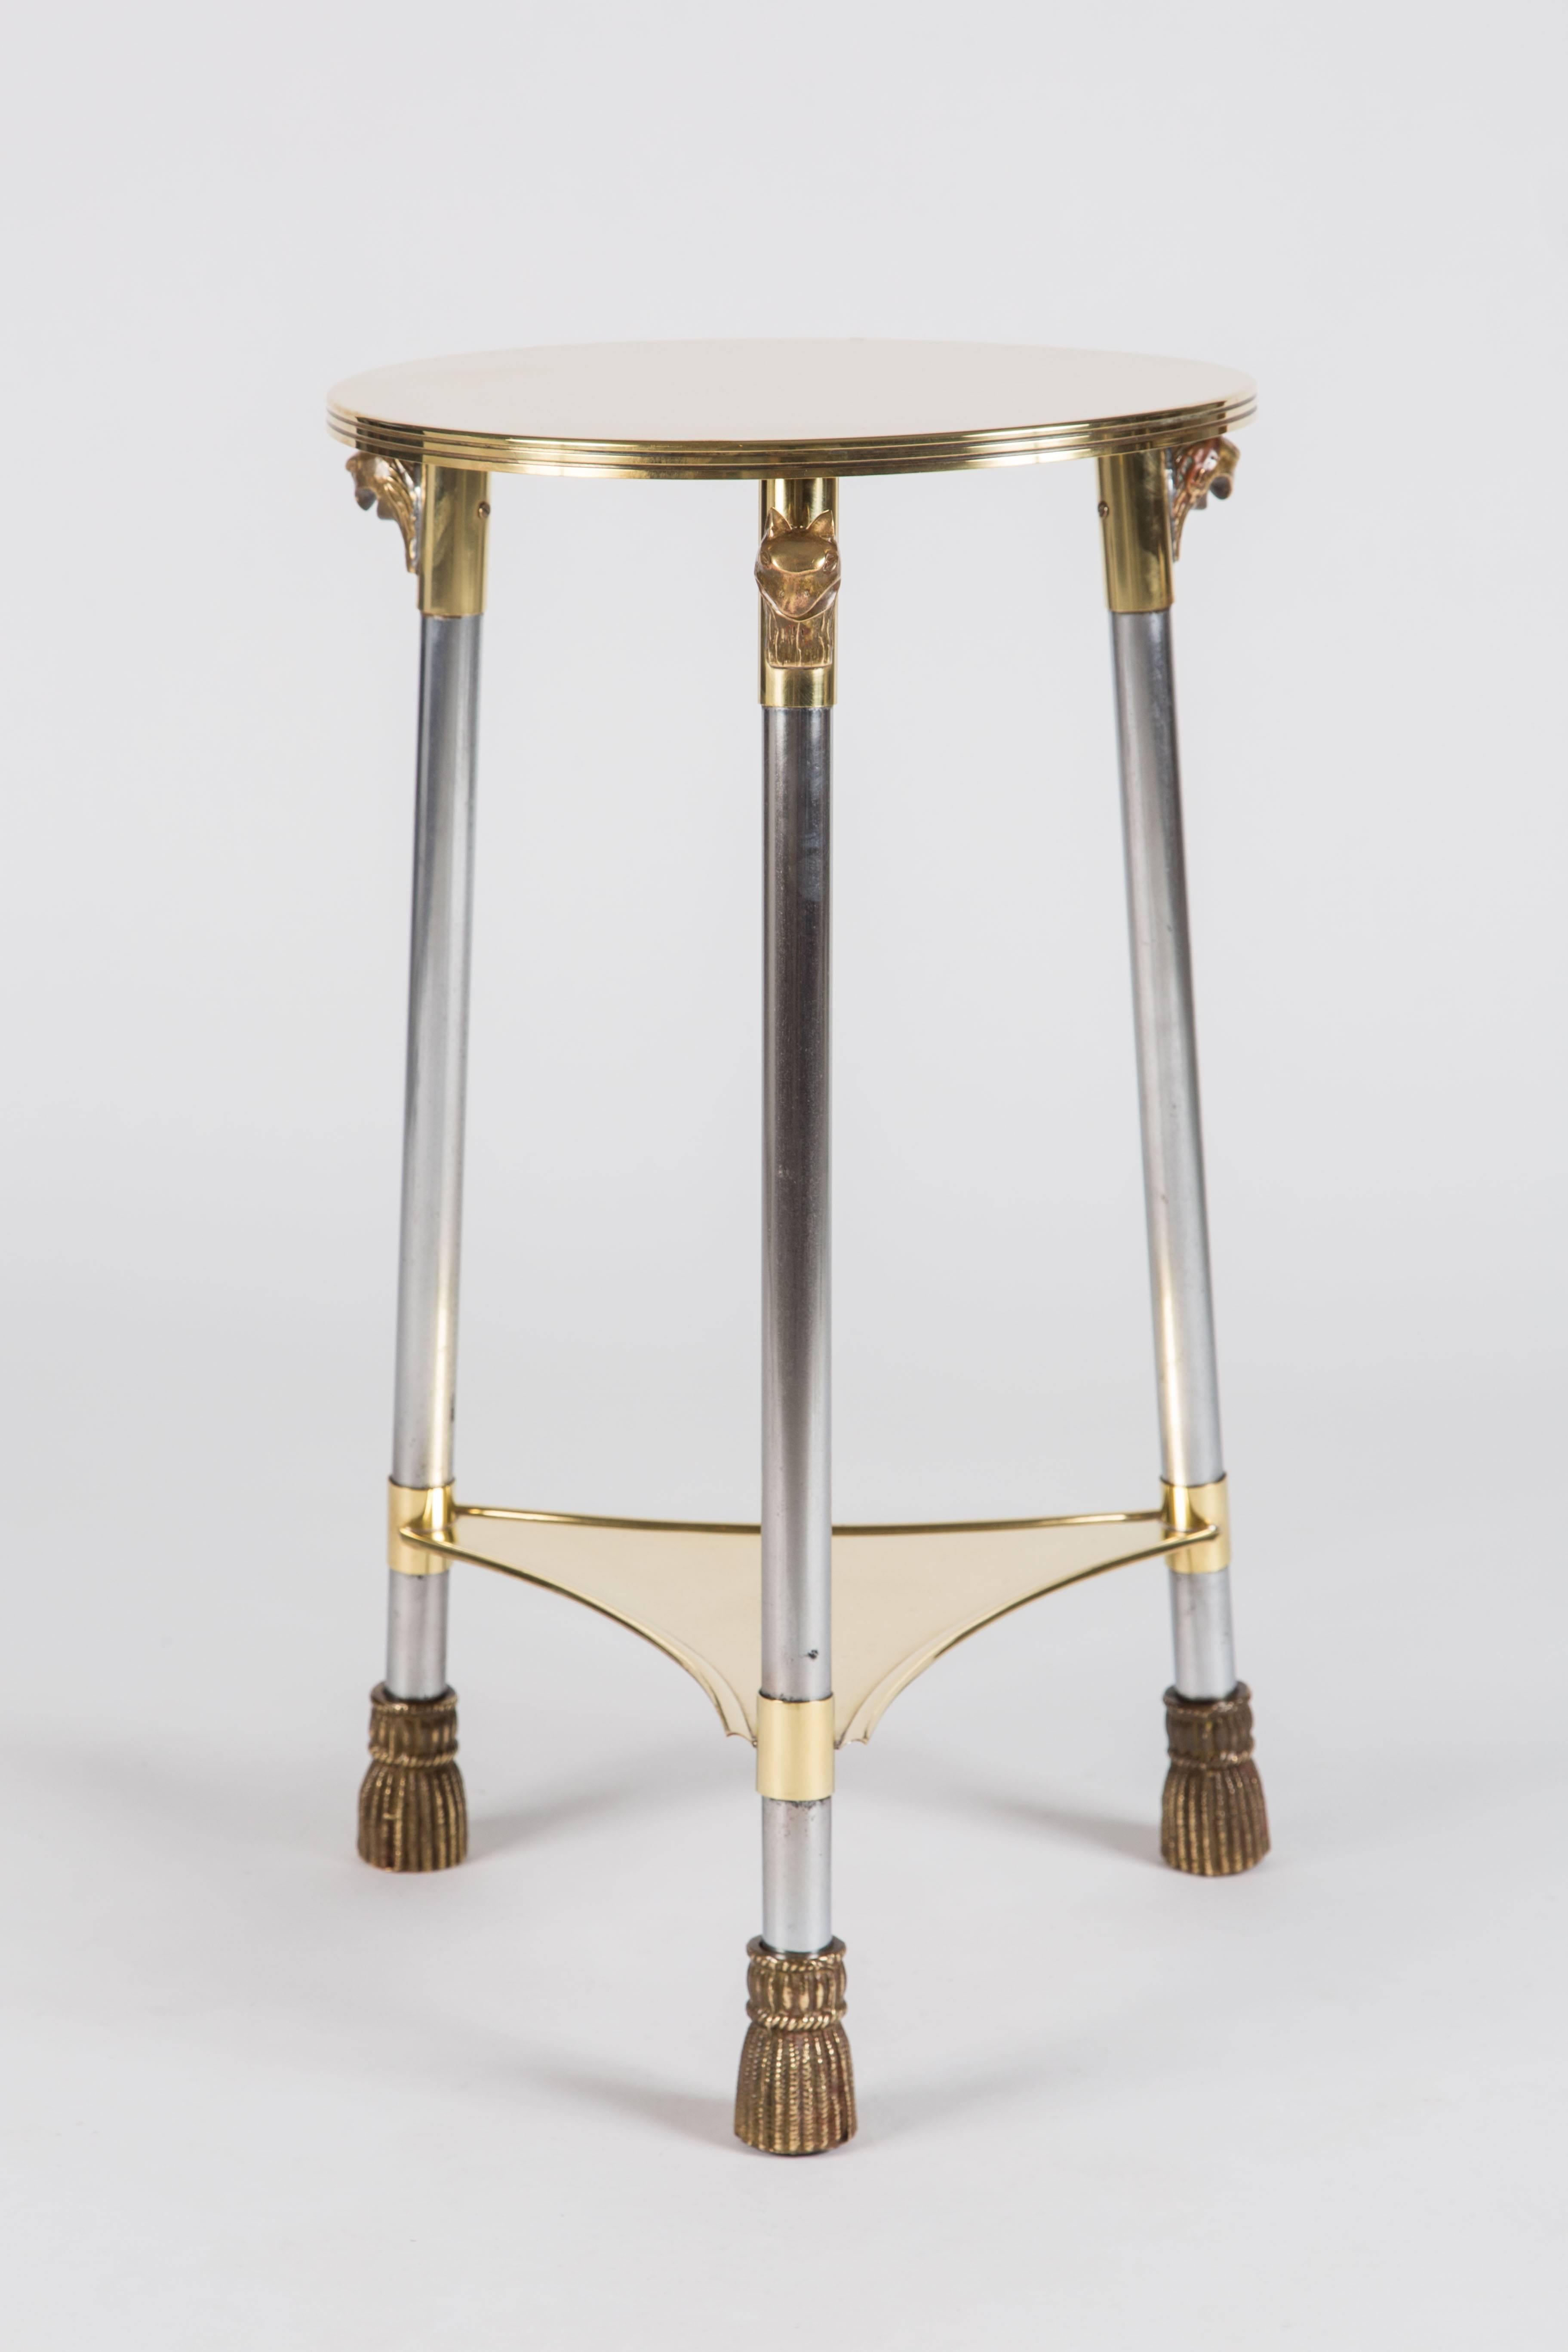 Fantastic tiered stand in polished brass and steel, featuring decorative cat heads about the legs. The legs terminate in tassel motif decorated feet.

Measures: 24 1/4 inches high.